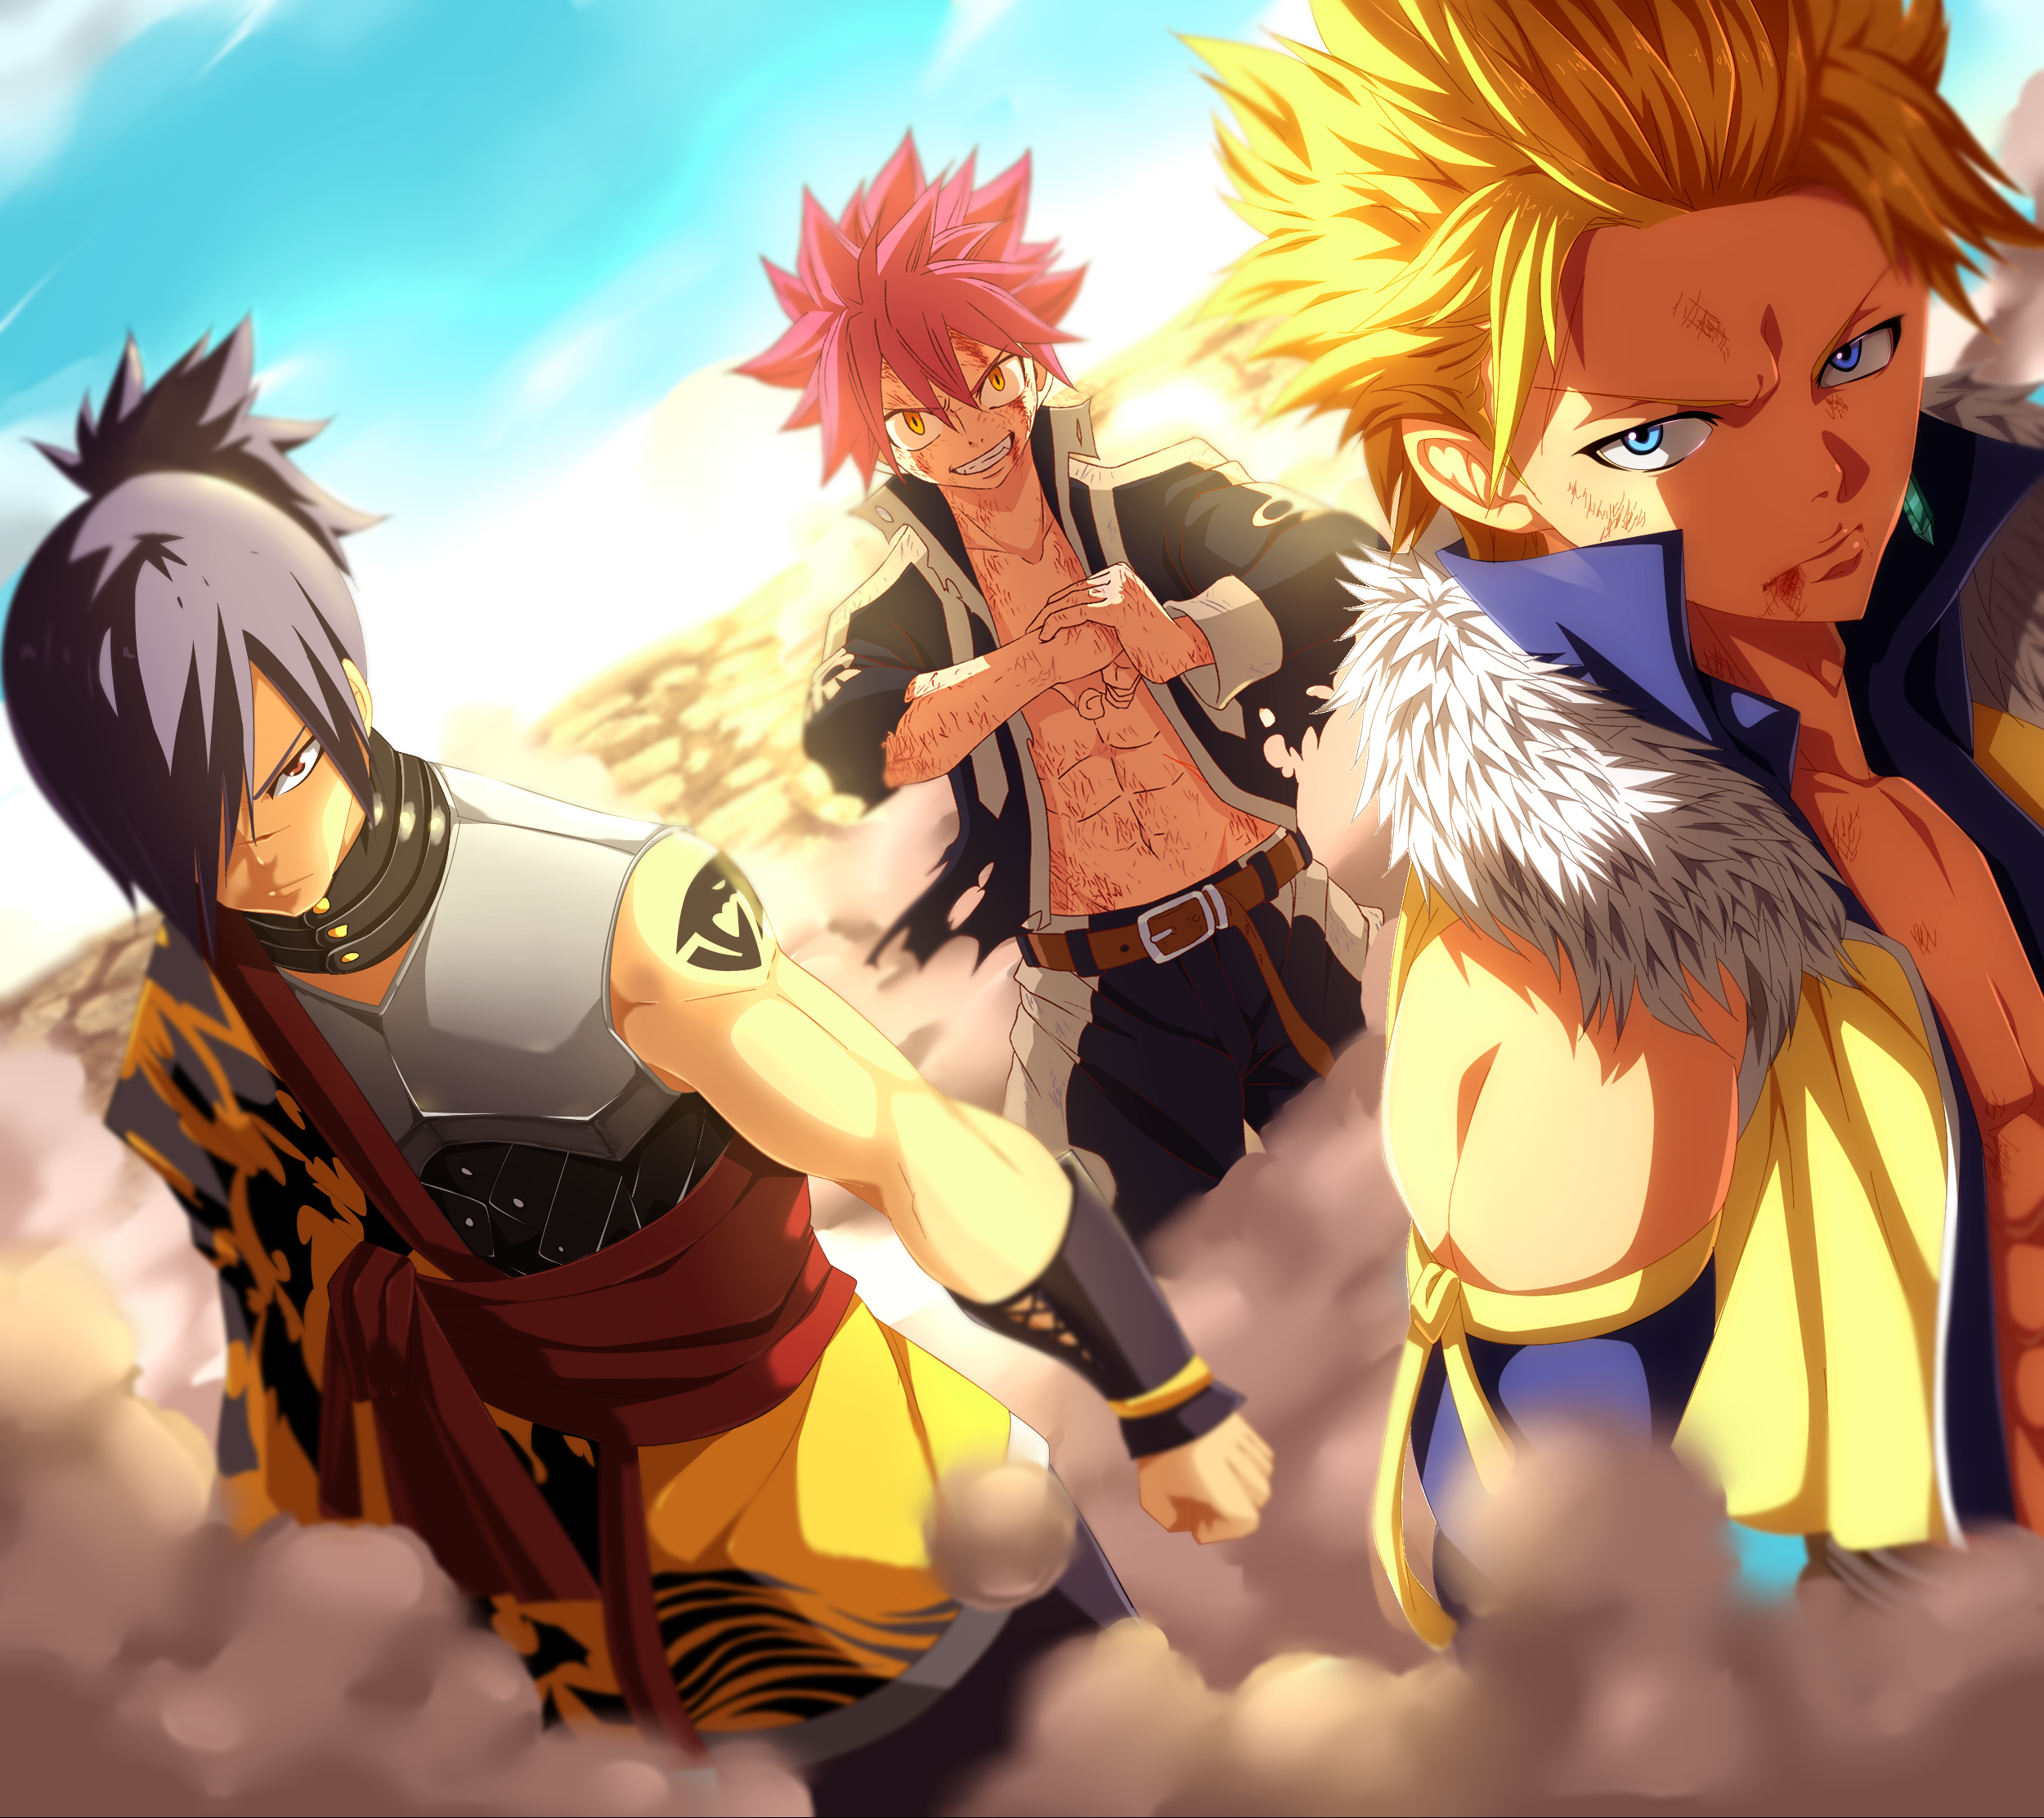 Fairy Tail Natsu Dragneel Rogue Cheney Sabertooth Fairy Tail Sting Eucliffe 2500x2224